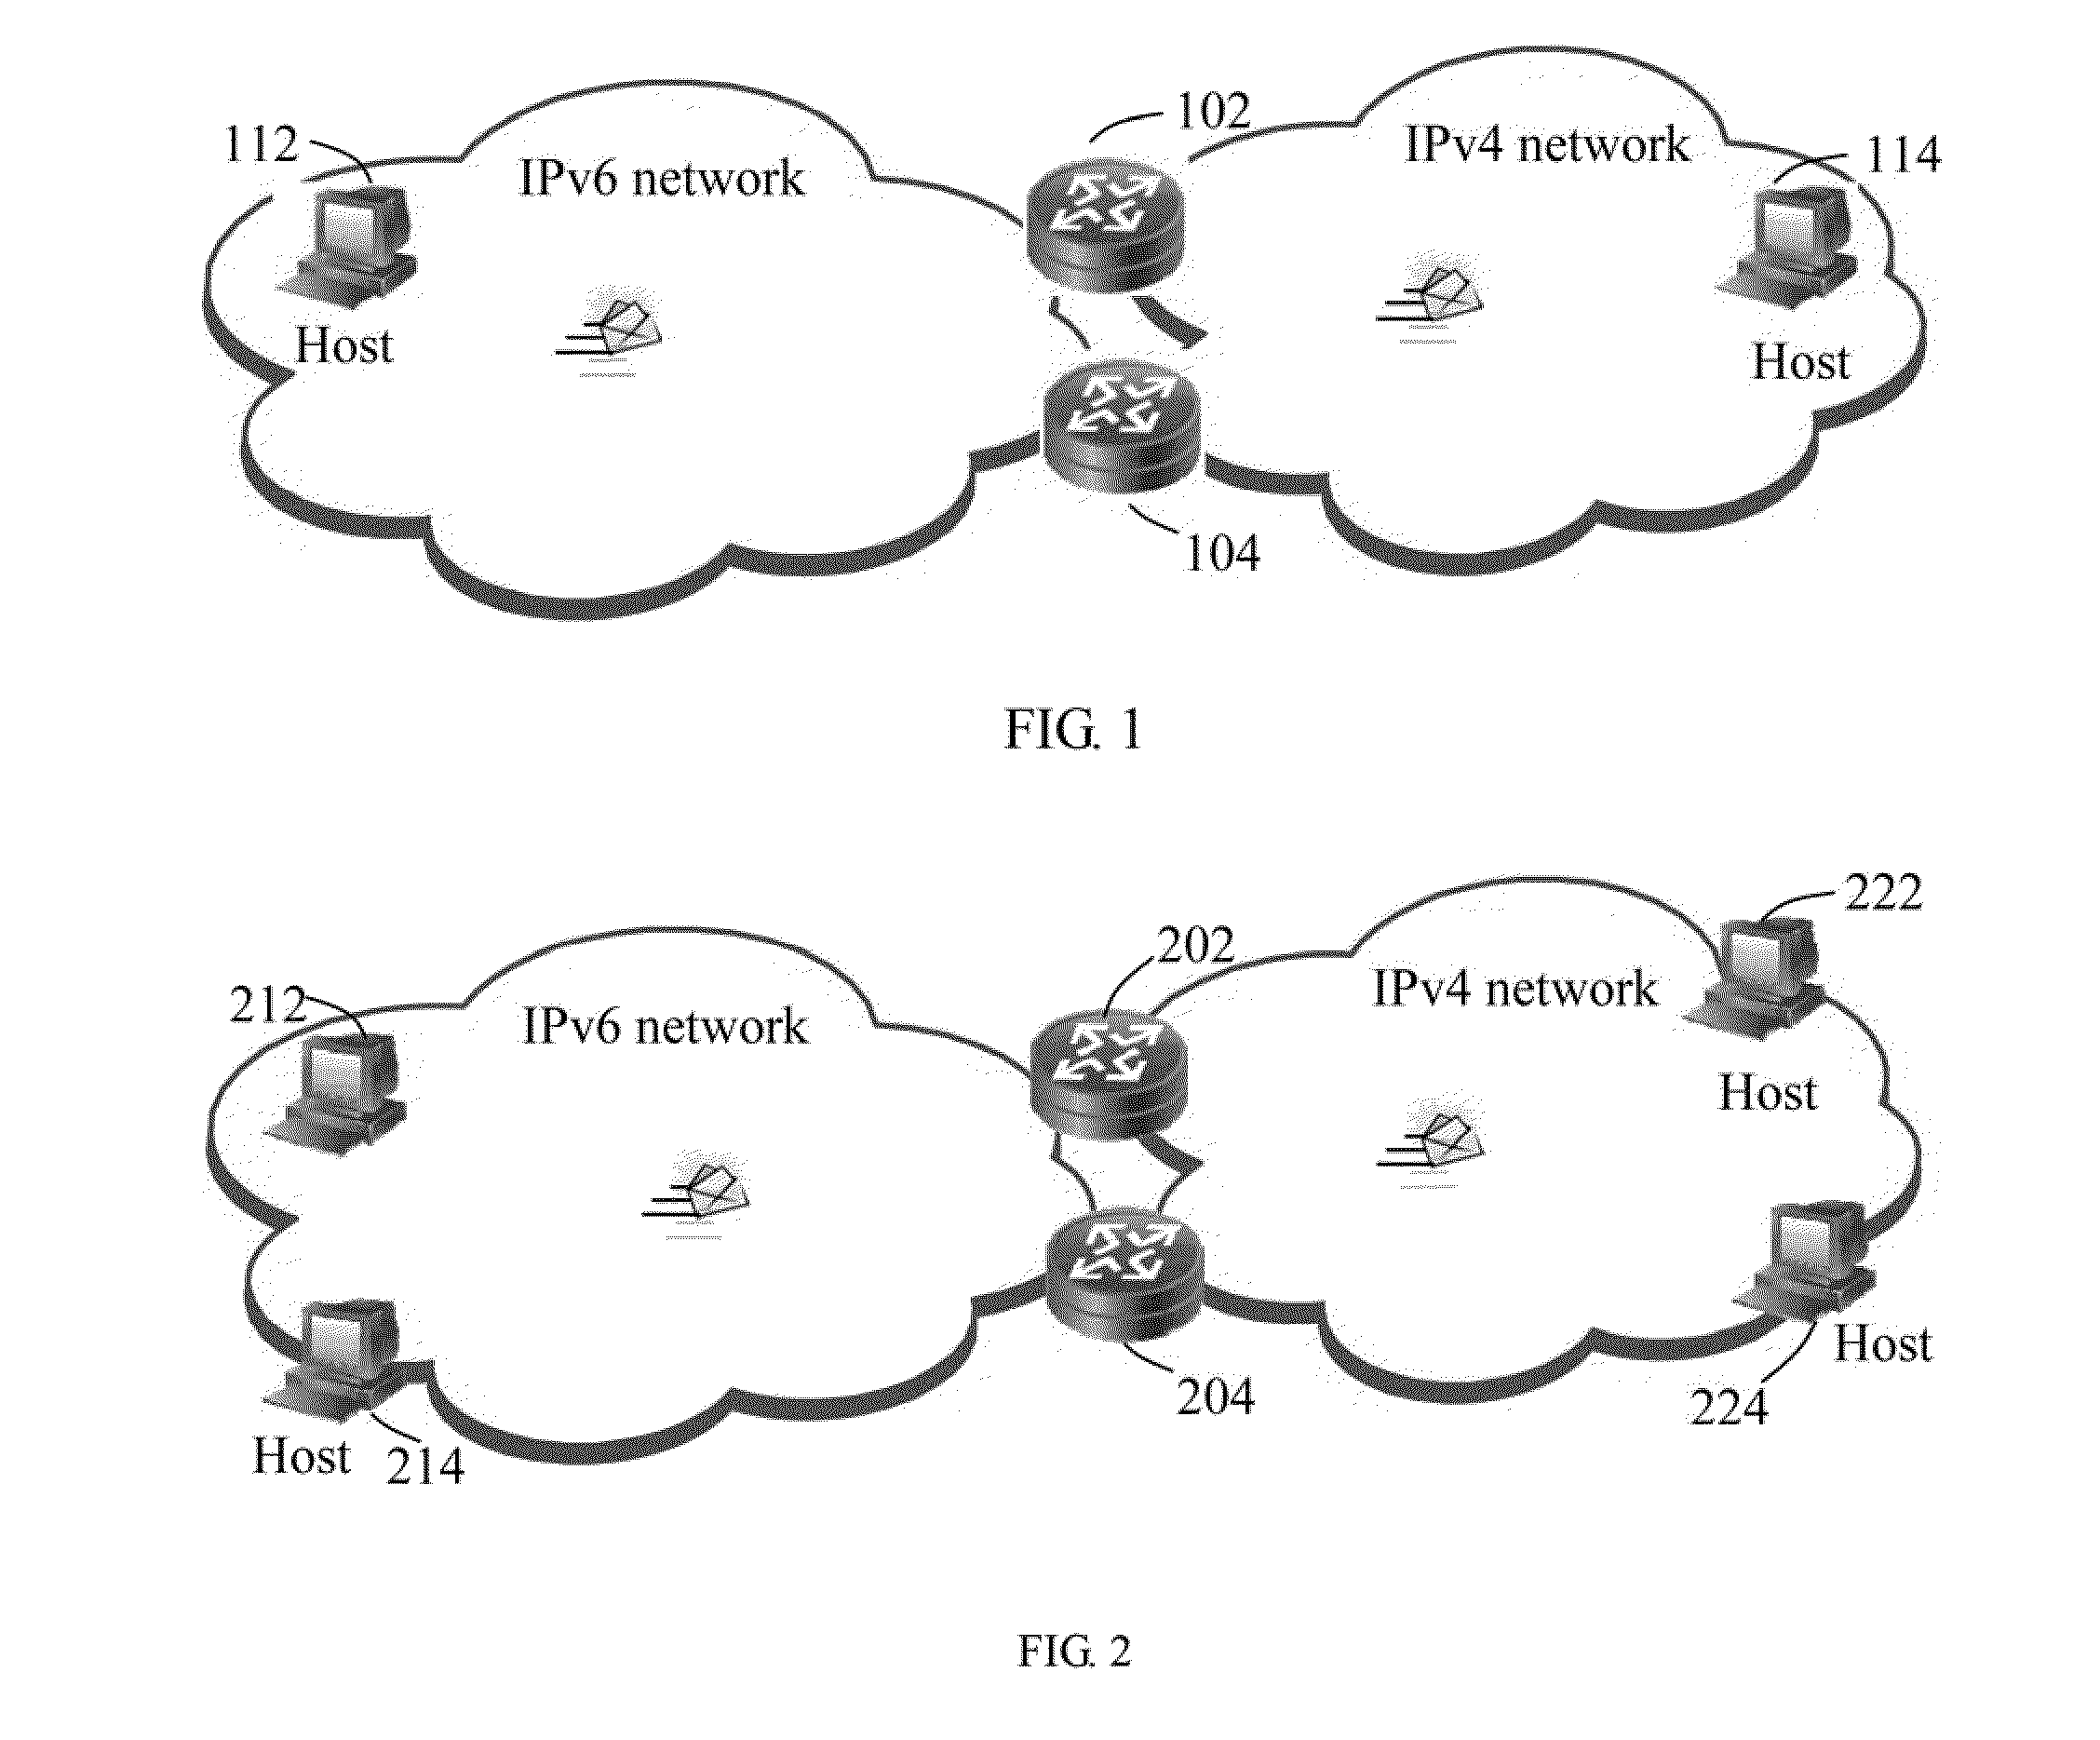 Method, apparatus, and system for implementing redundancy backup between NAT devices